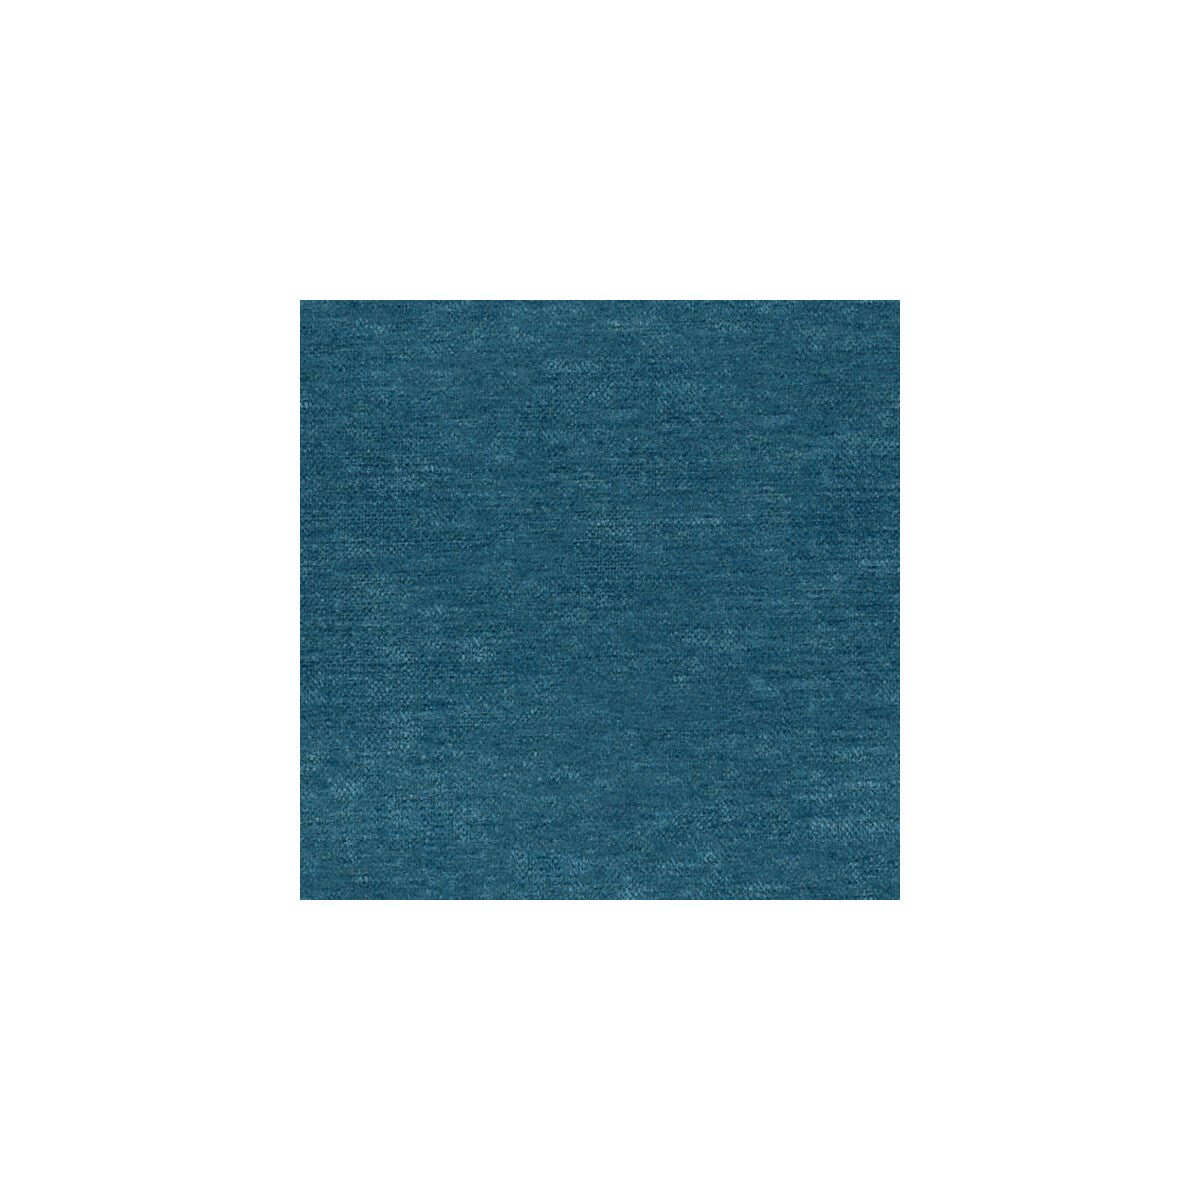 Kravet Contract fabric in 32015-15 color - pattern 32015.15.0 - by Kravet Contract